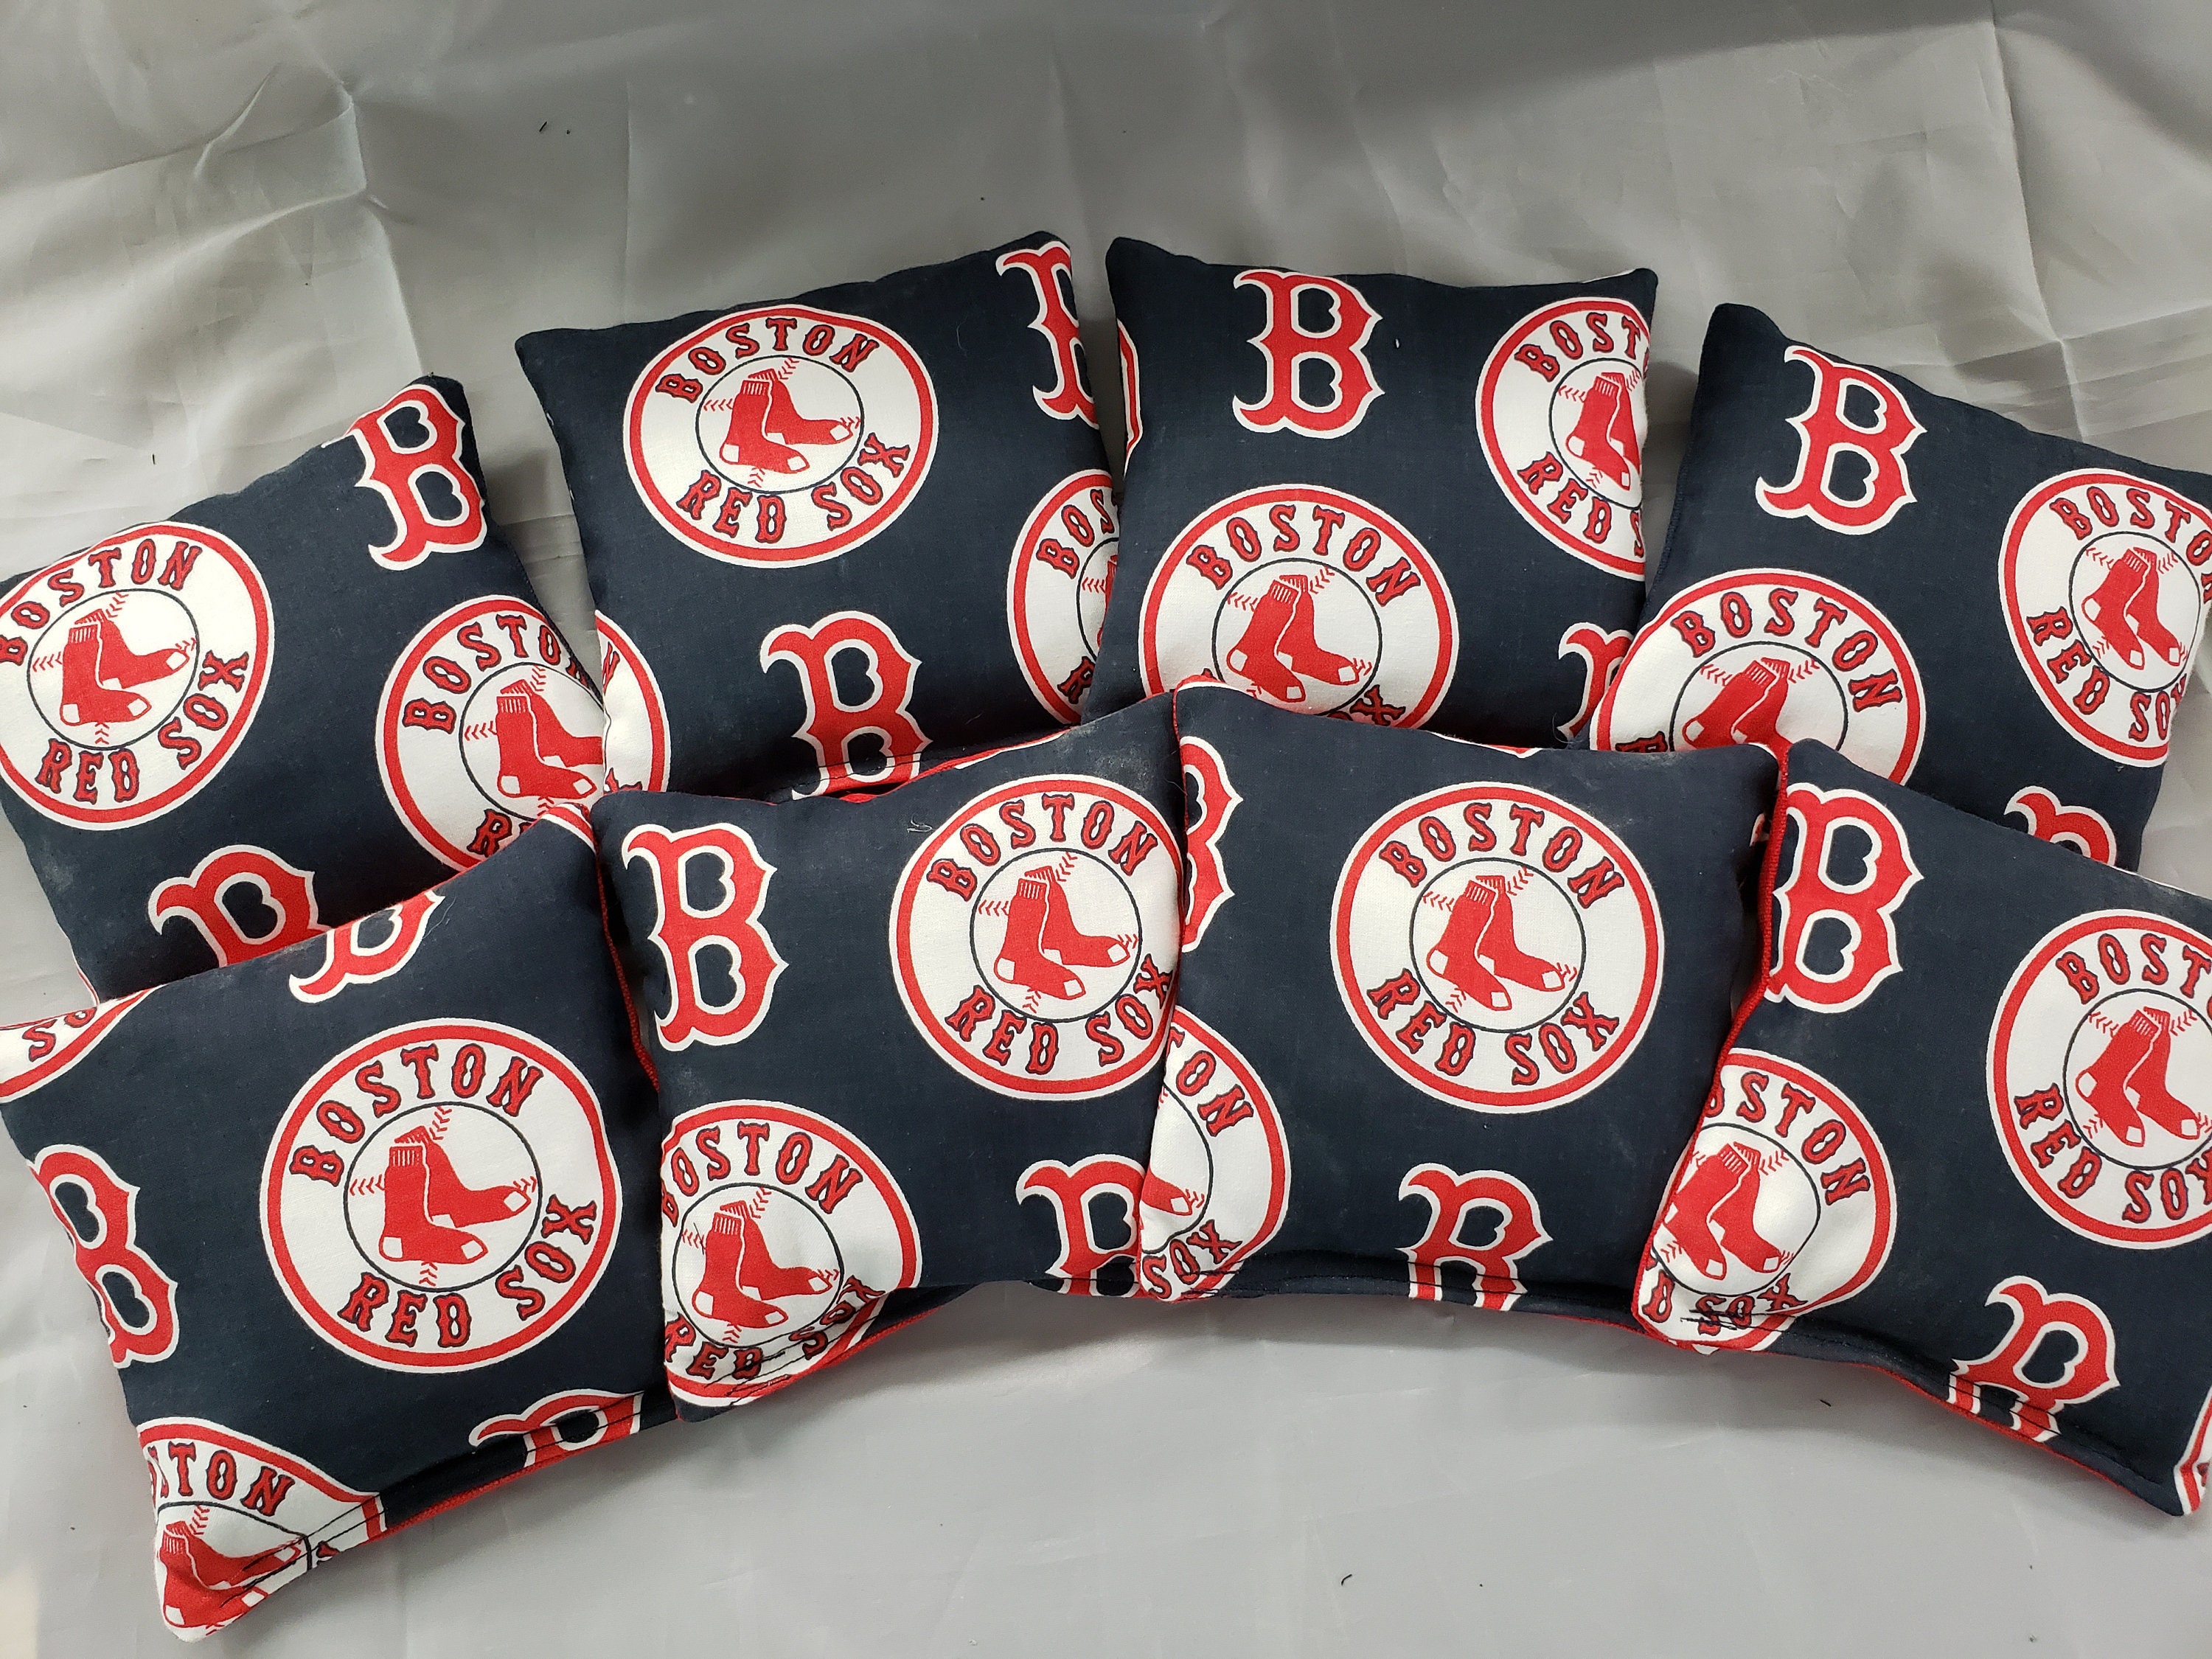 BOSTON RED SOX CORNHOLE BEAN BAGS SET OF 8 ALL WEATHER WASHABLE CORN HOLE BAGS 